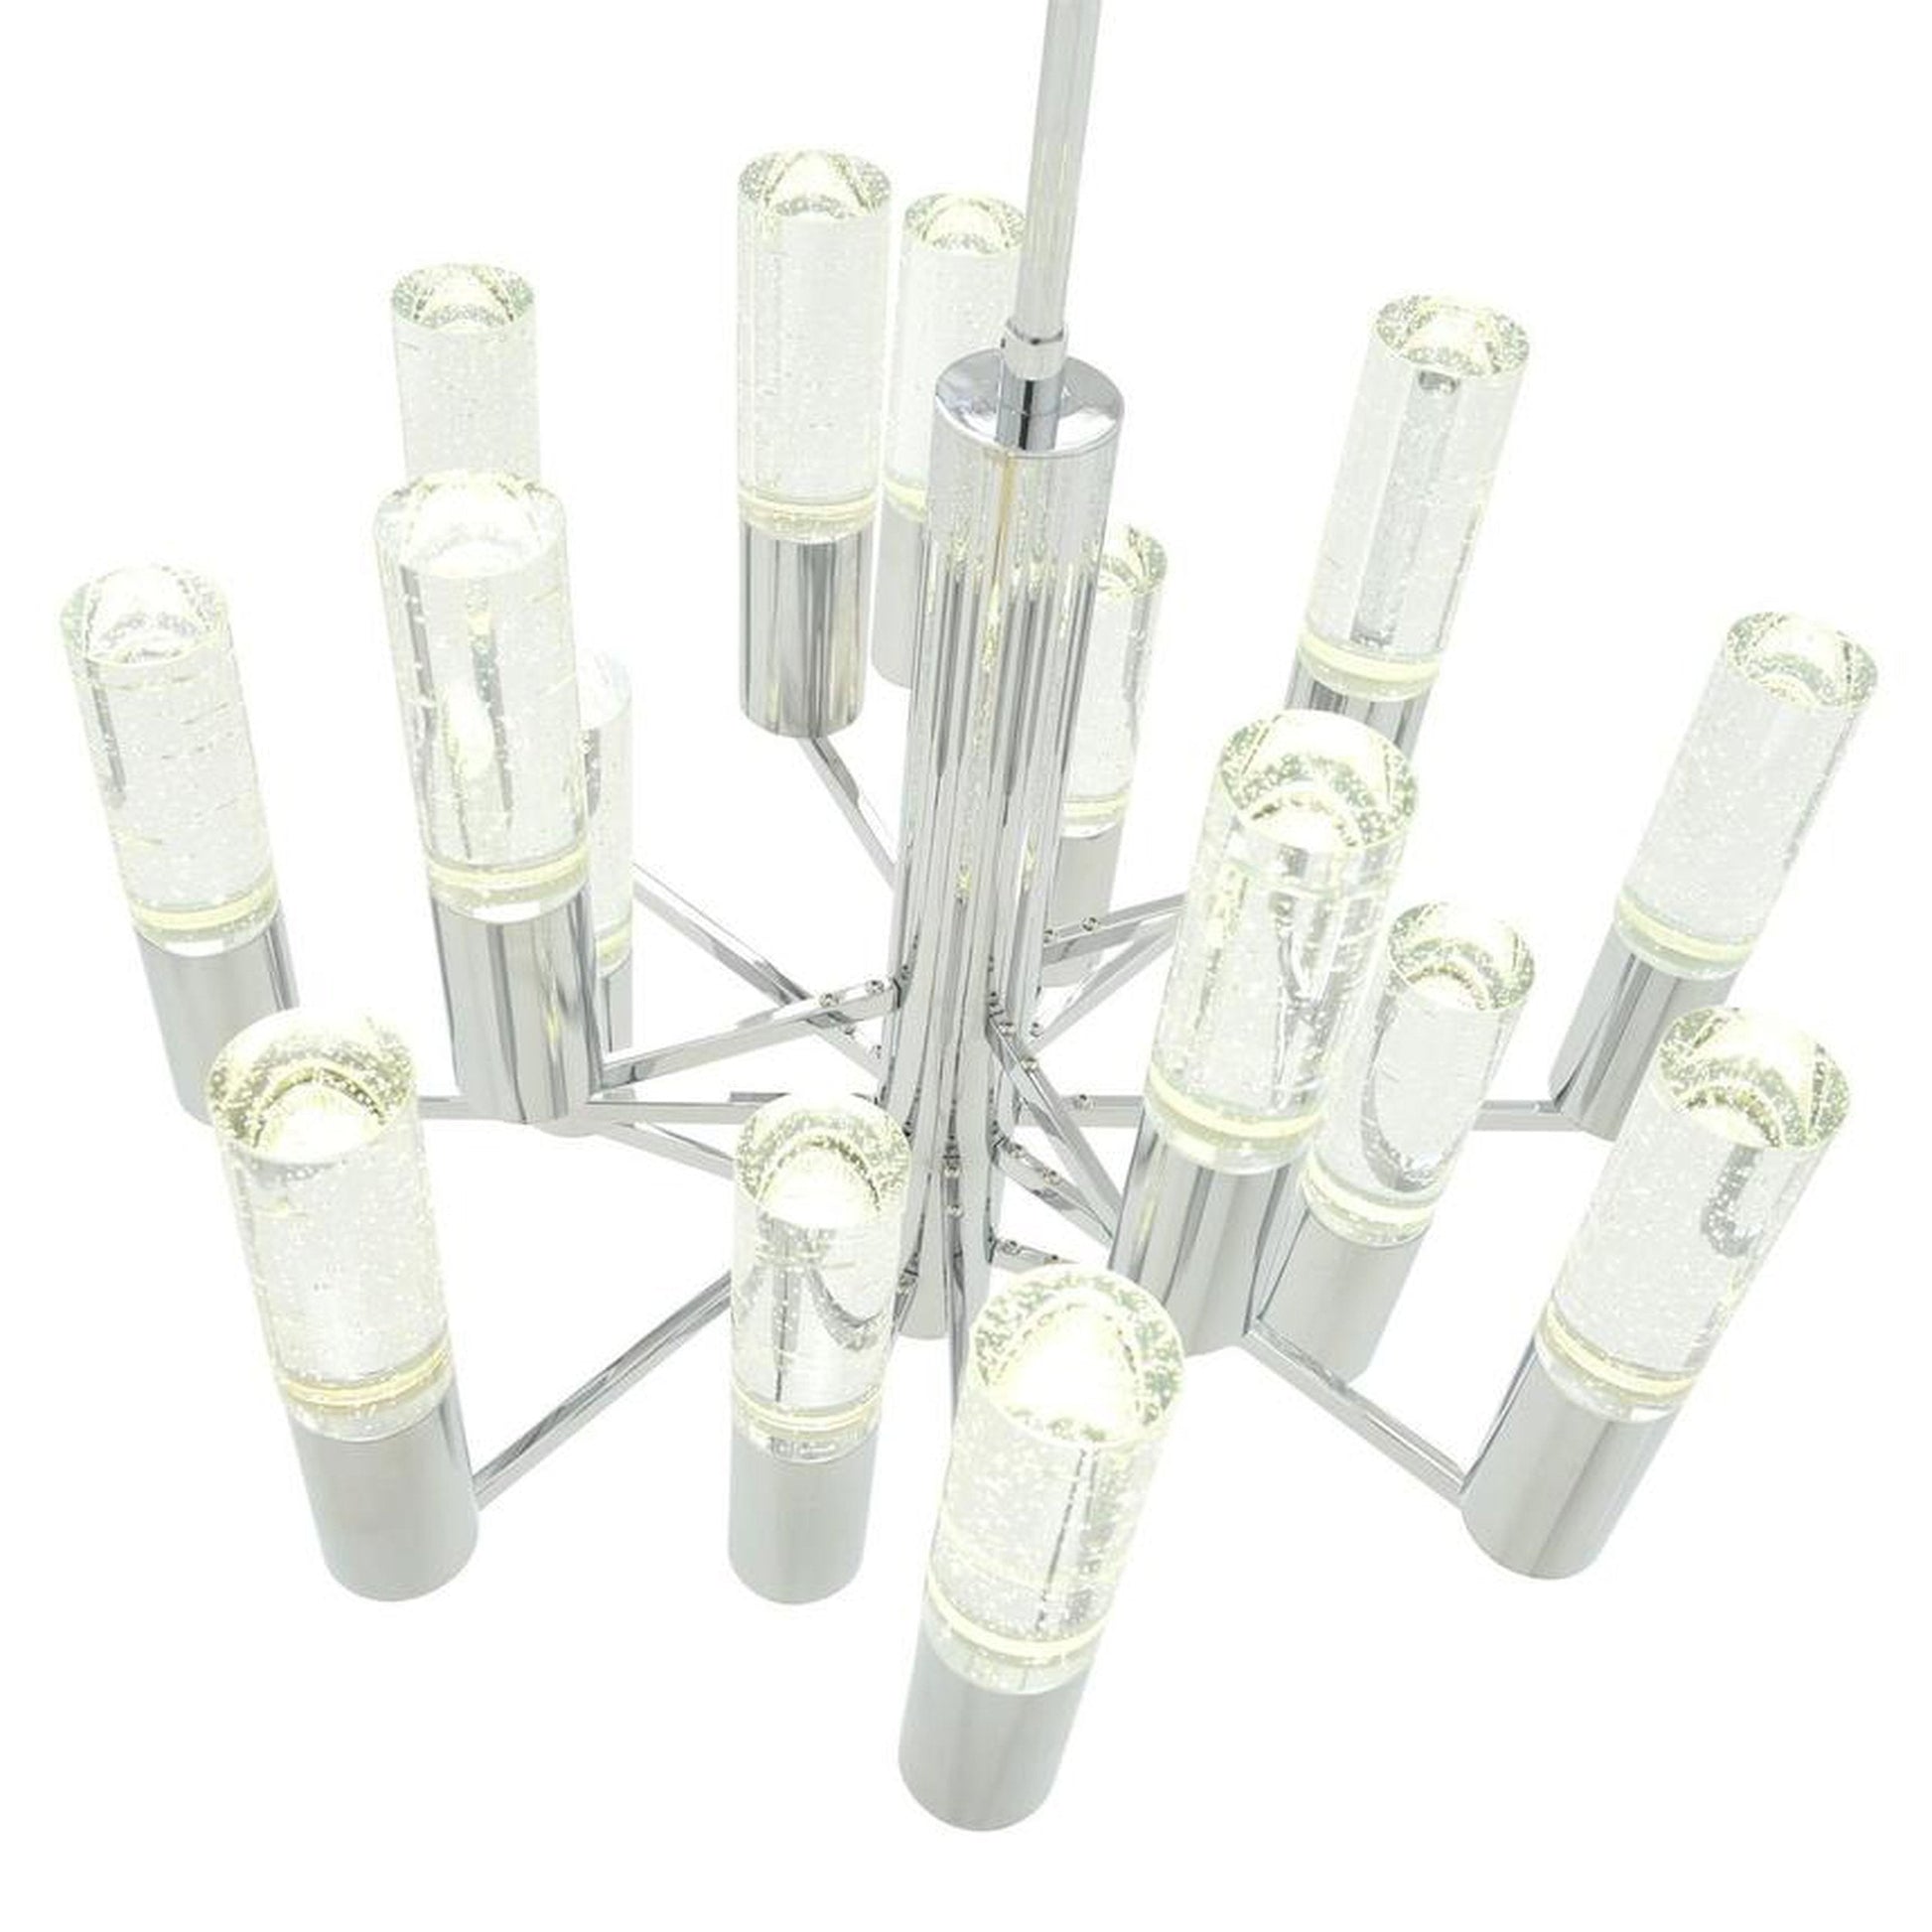 Crystal Cylinders Chandelier // 16 Lights // Dimmable